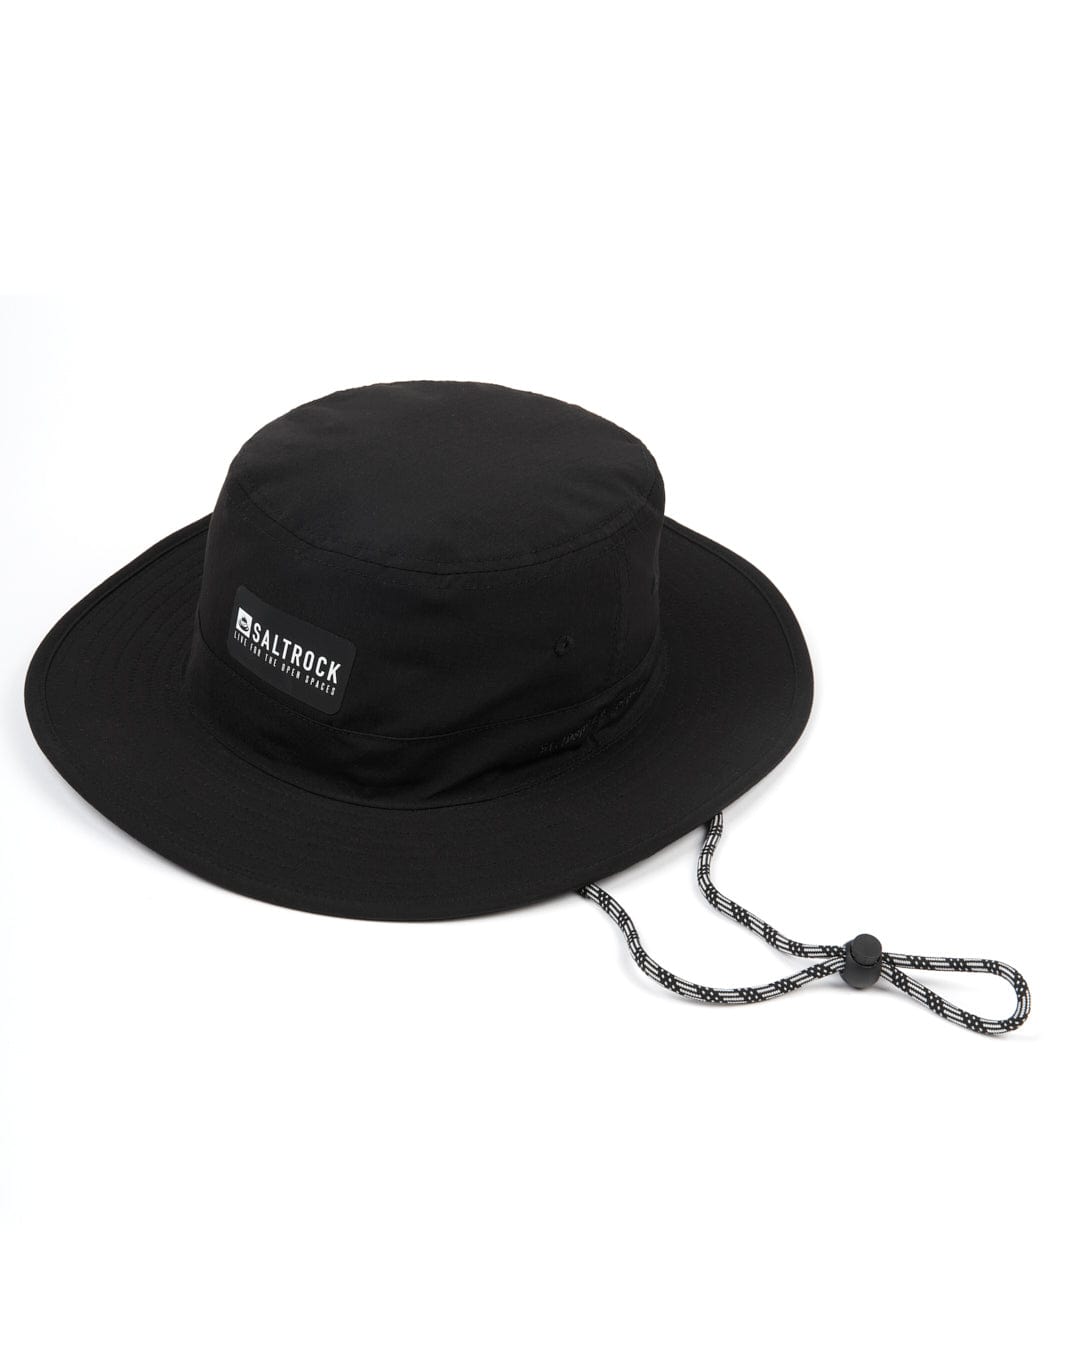 A black Saltrock bucket hat with UPF protection and a rope attached to it.